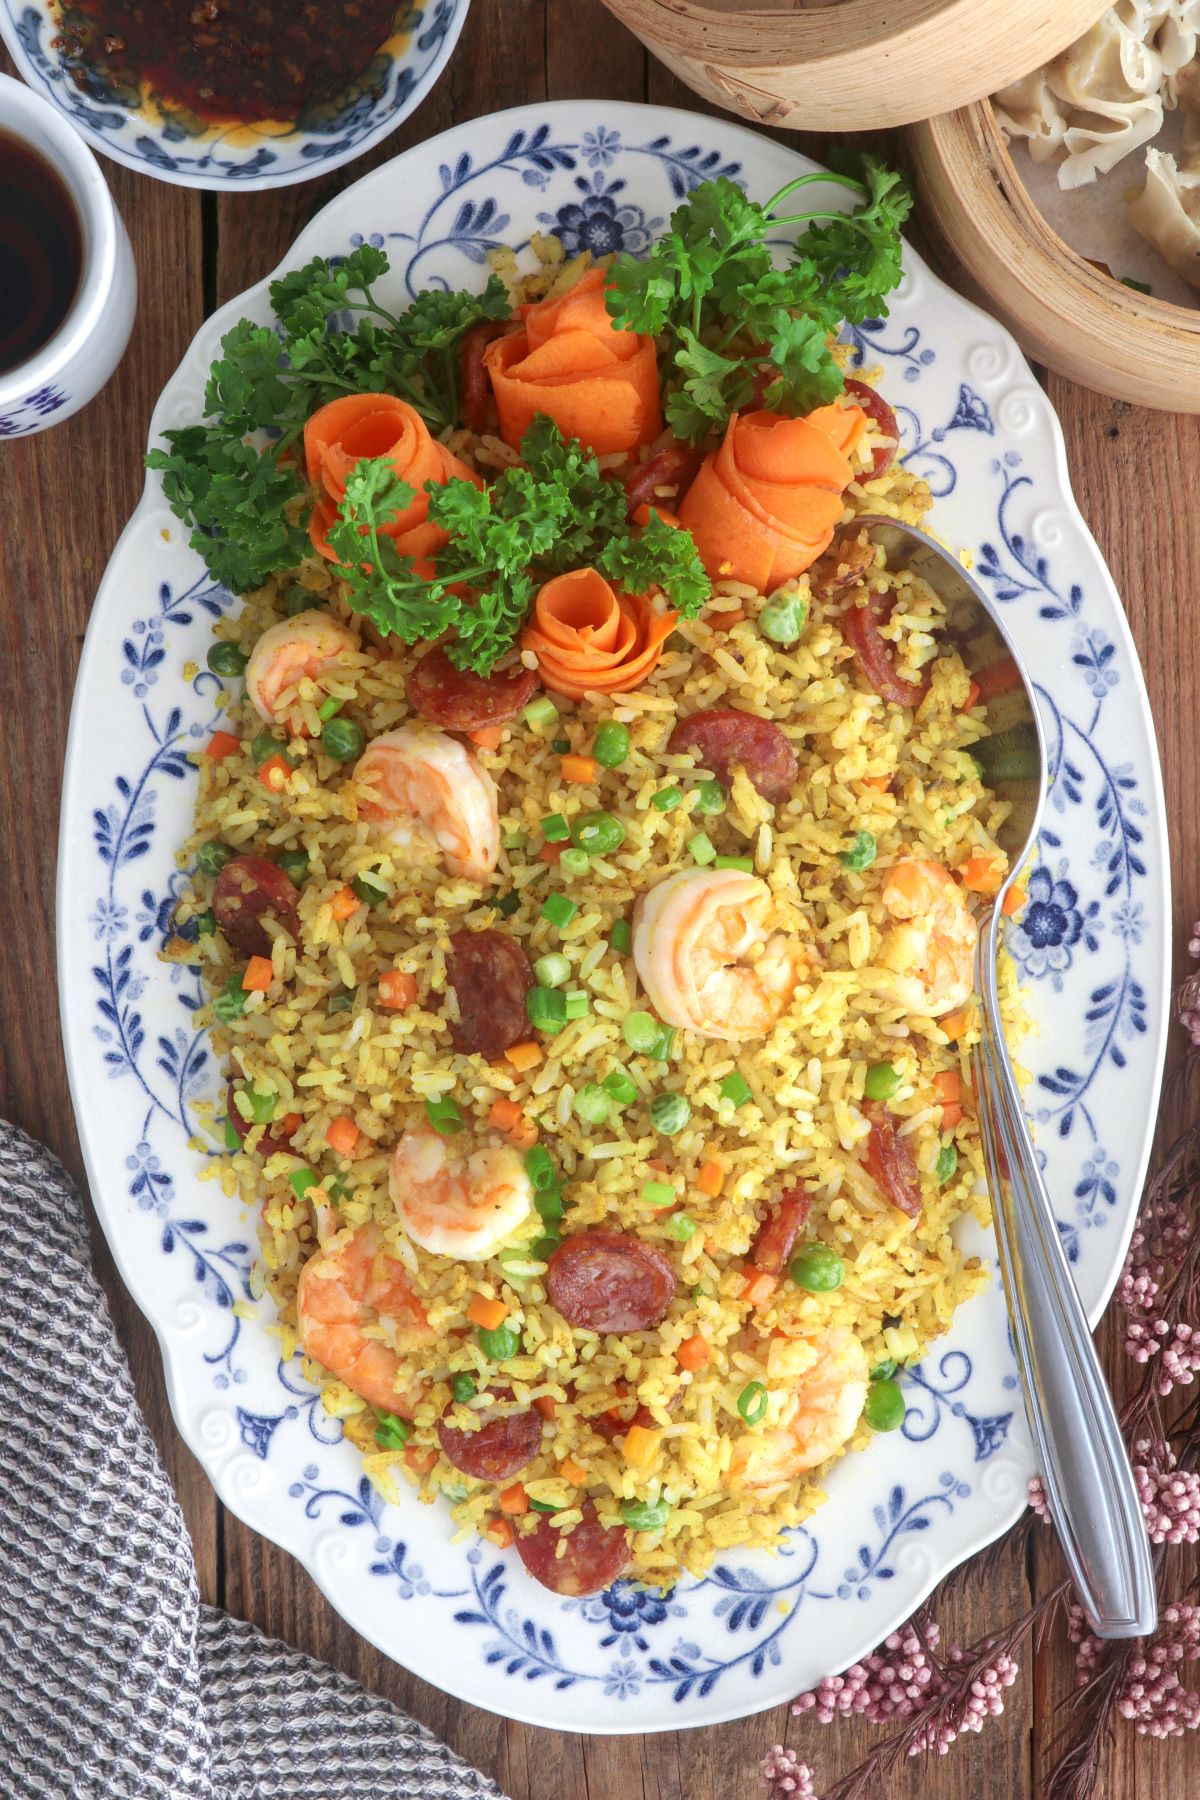 Yang Chow fried rice in a serving platter loaded with shrimp, sausages, eggs, carrots, and green peas.